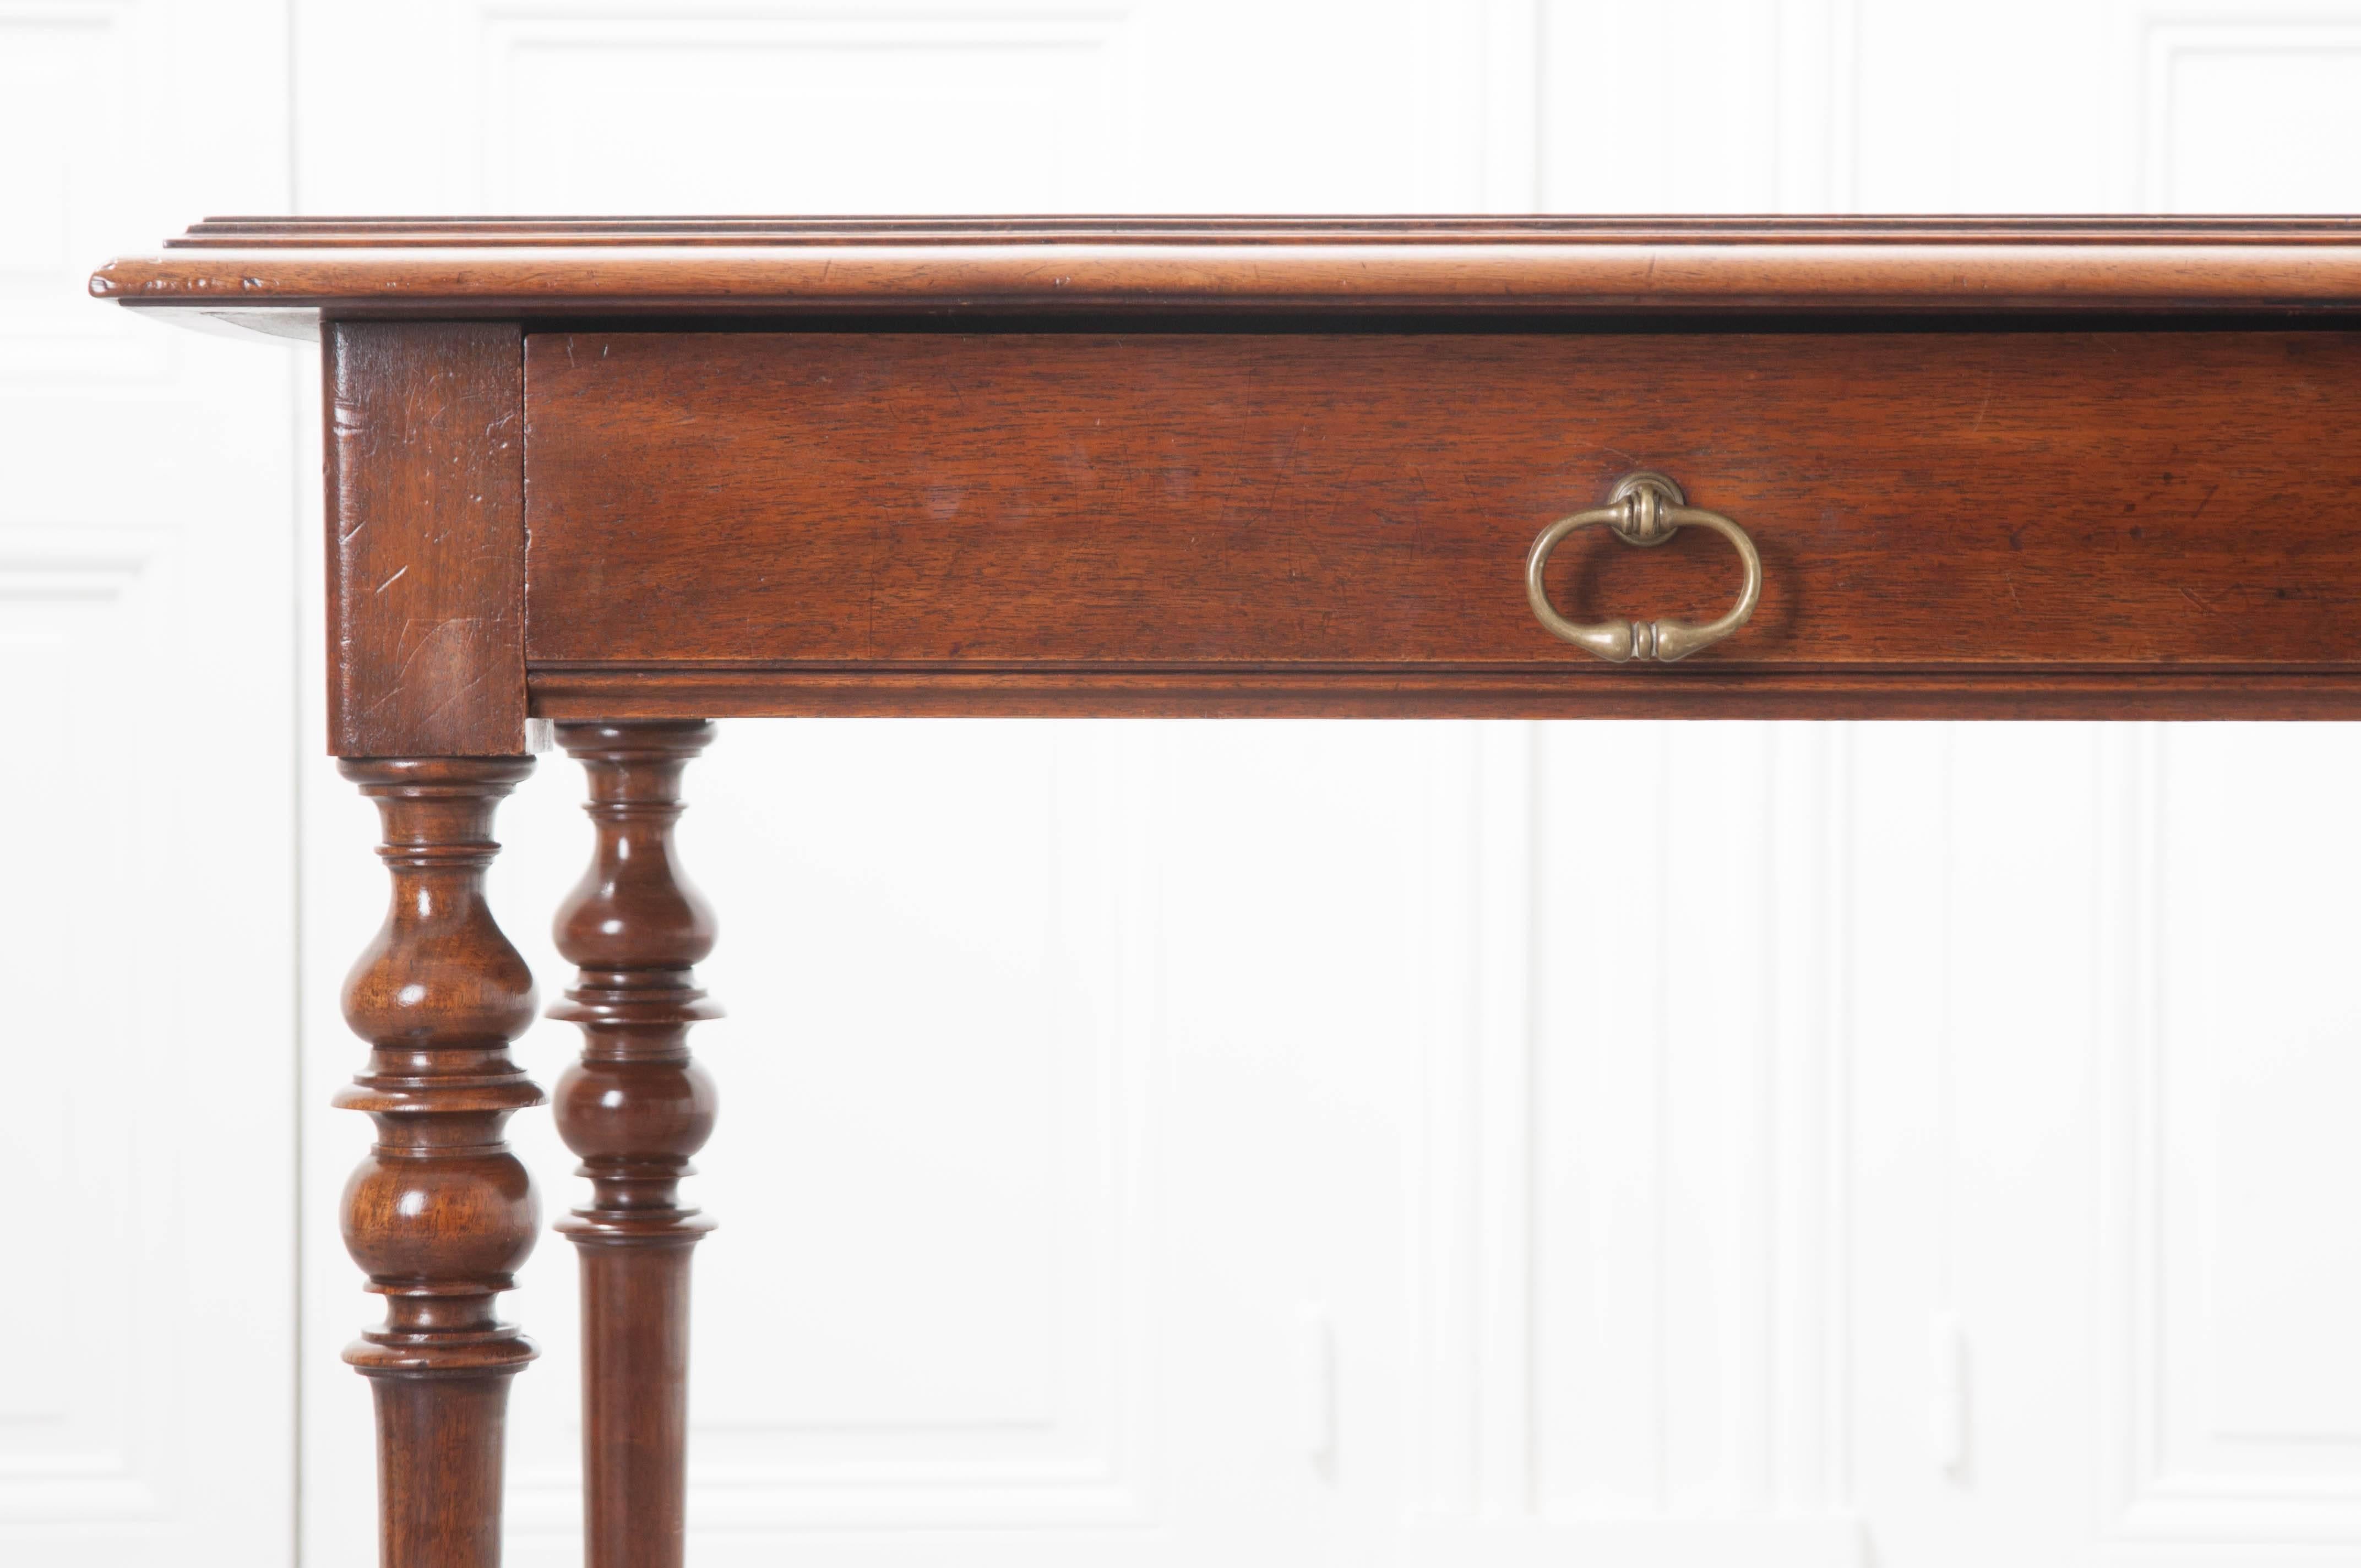 This cheery little table or writing desk was made using solid walnut, in Italy, circa 1860. The antique has a wide drawer that accounts for most of the table’s apron. This drawer has a lovely, antique brass drop-ring pull, and opens easily for out